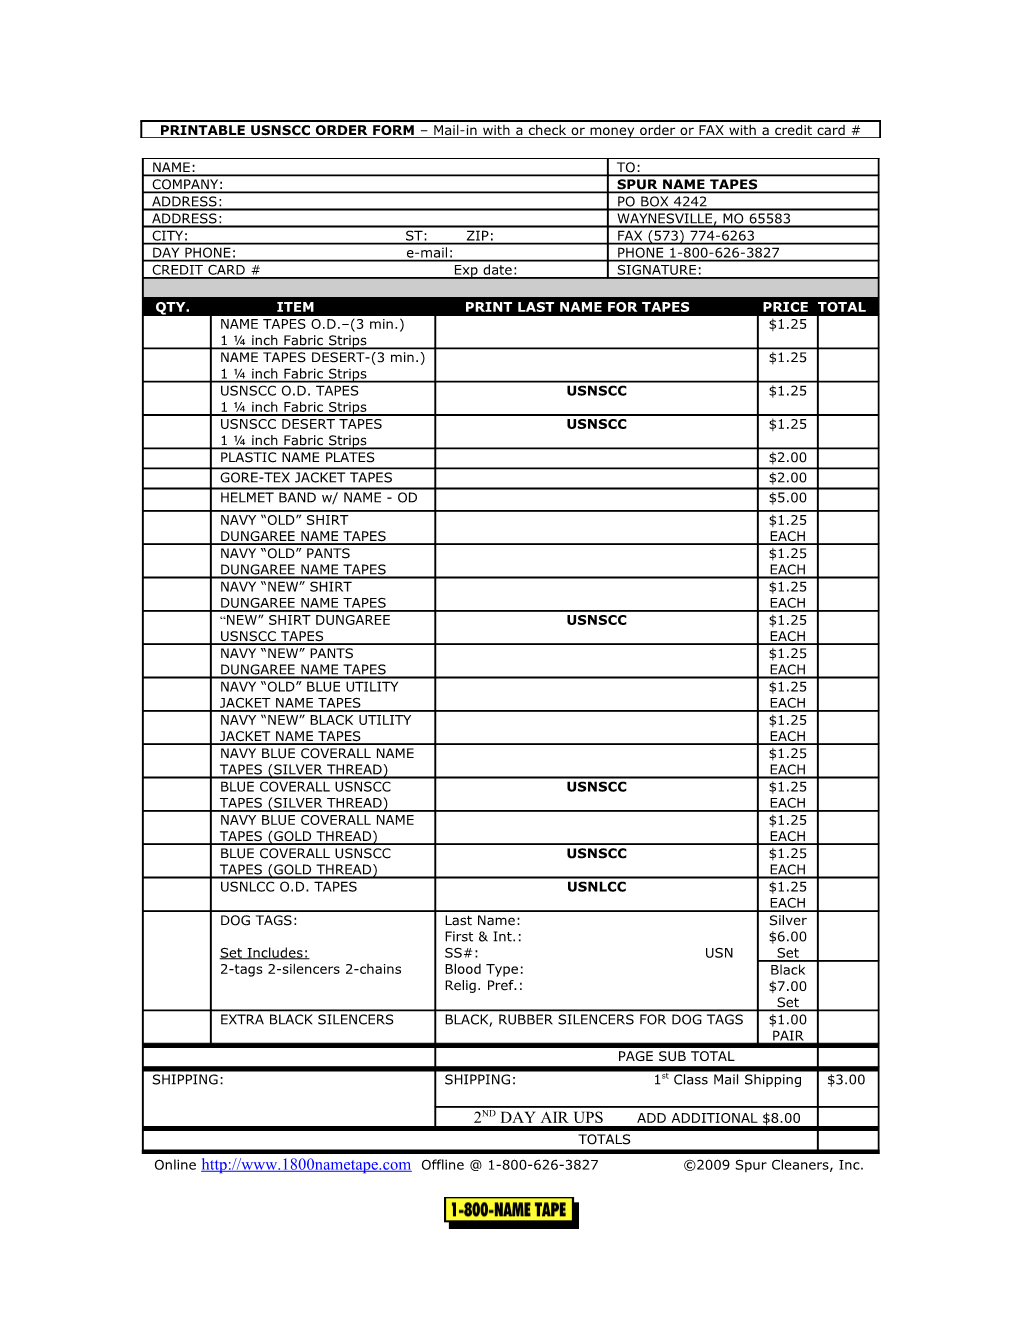 PRINTABLE ARMY ORDER FORM Mail-In with a Check Or Money Order Or FAX with a Credit Card